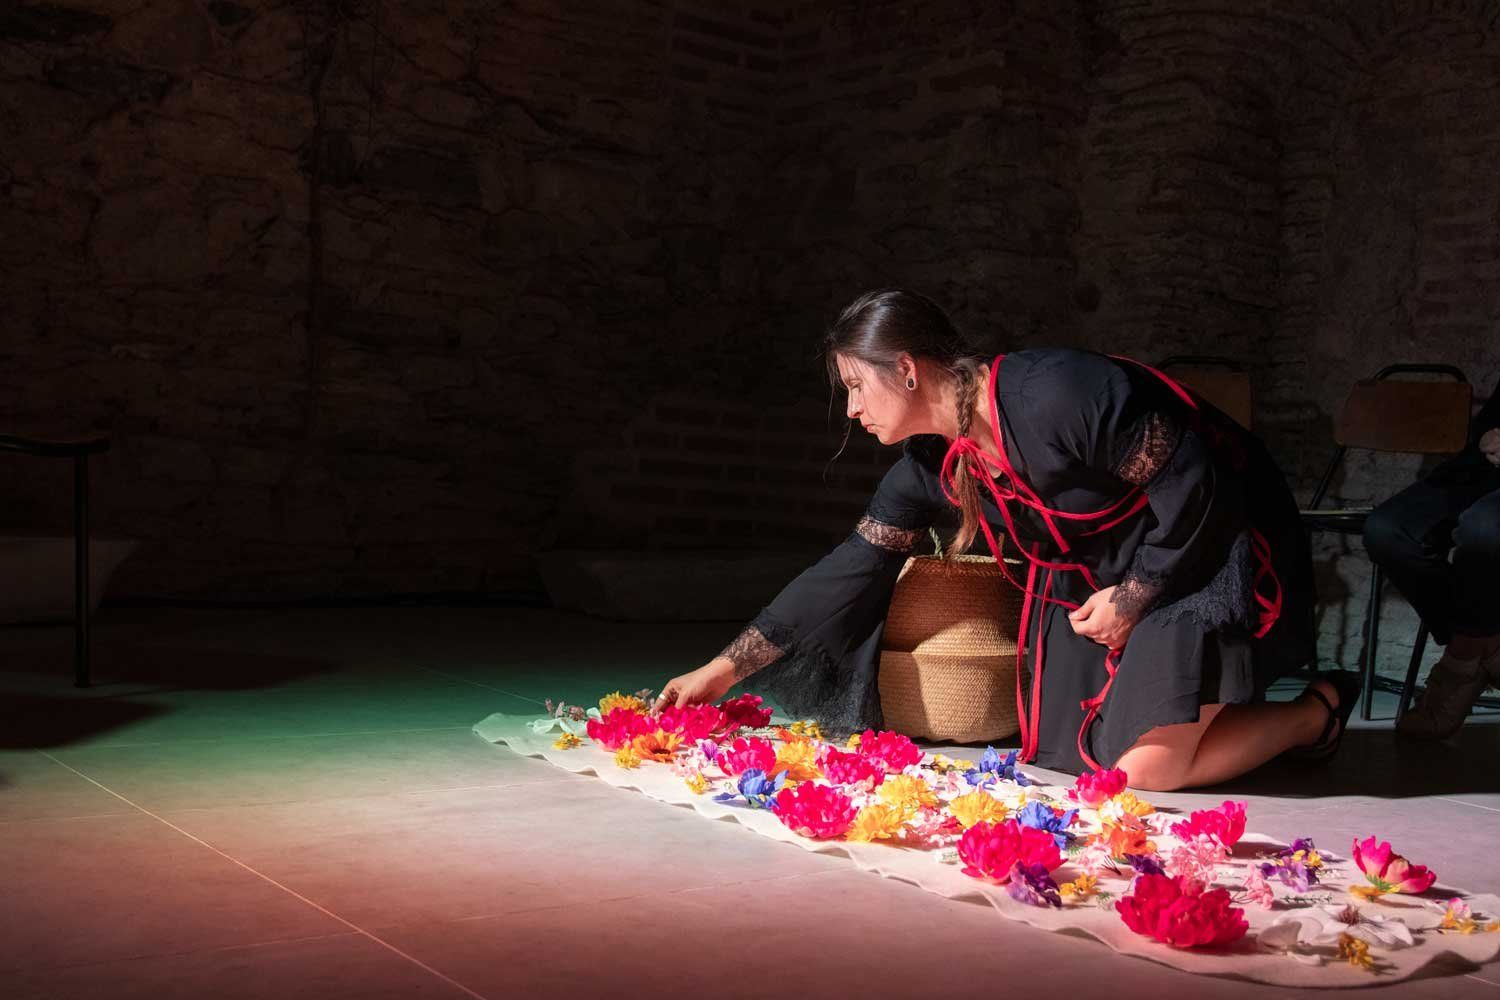 Katina Bitsicas kneels as she places flowers on a canvas spread on the floor, as part of her art installation "In Memoriam."